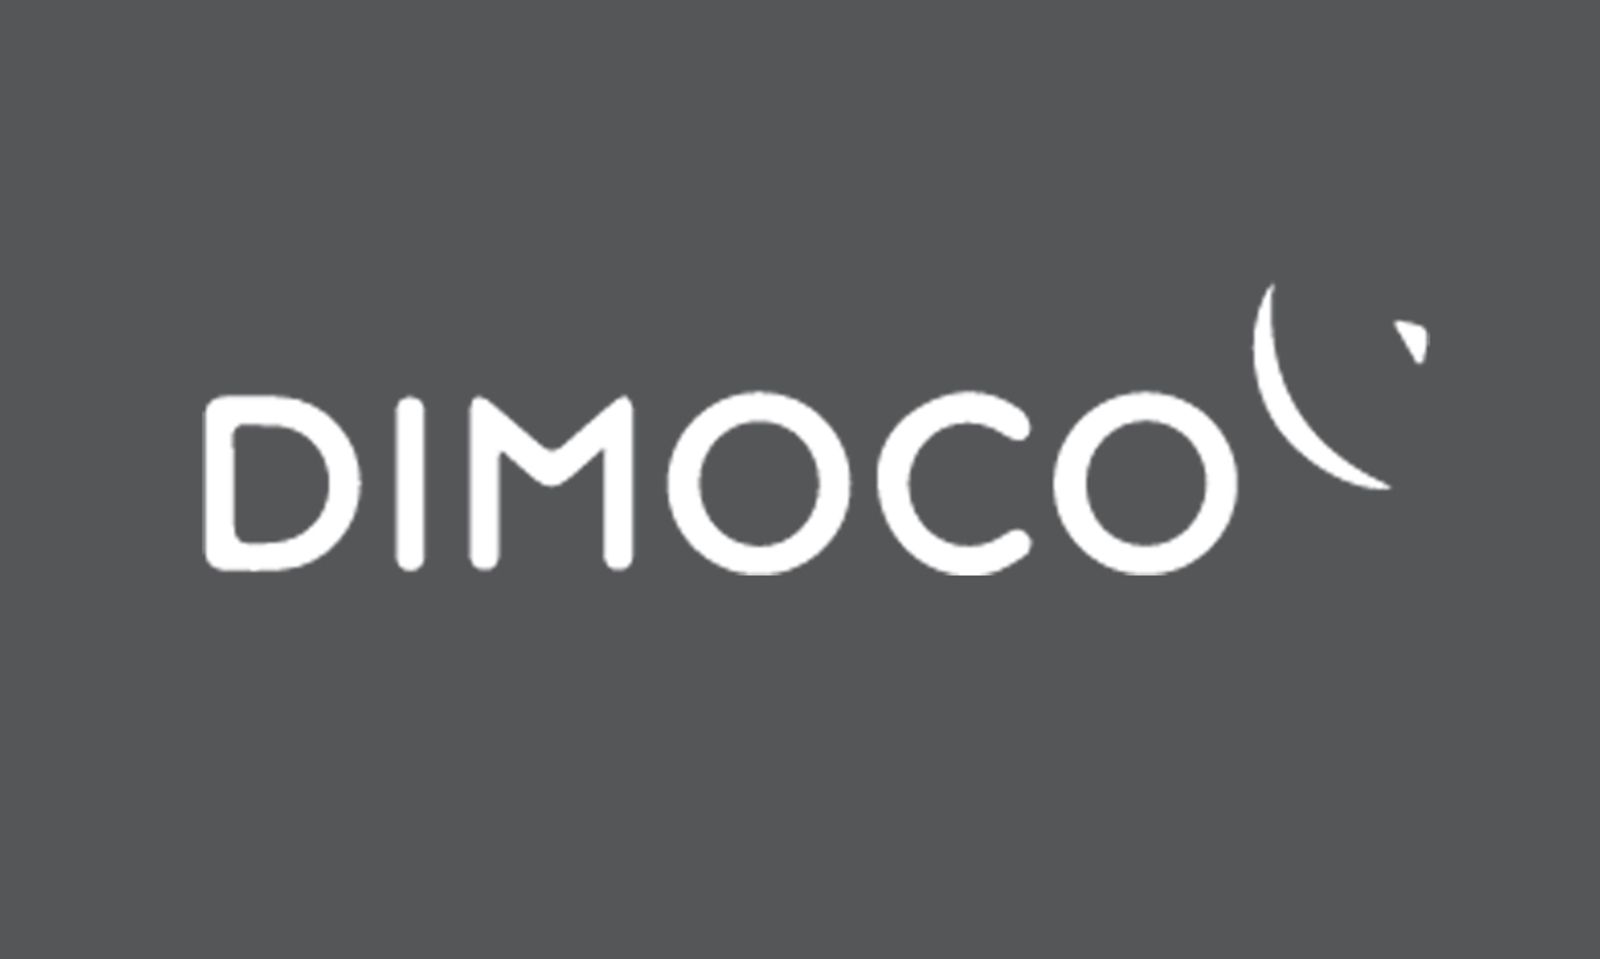 Dimoco Publishes Paper Analyzing Carrier Billing Market Potential